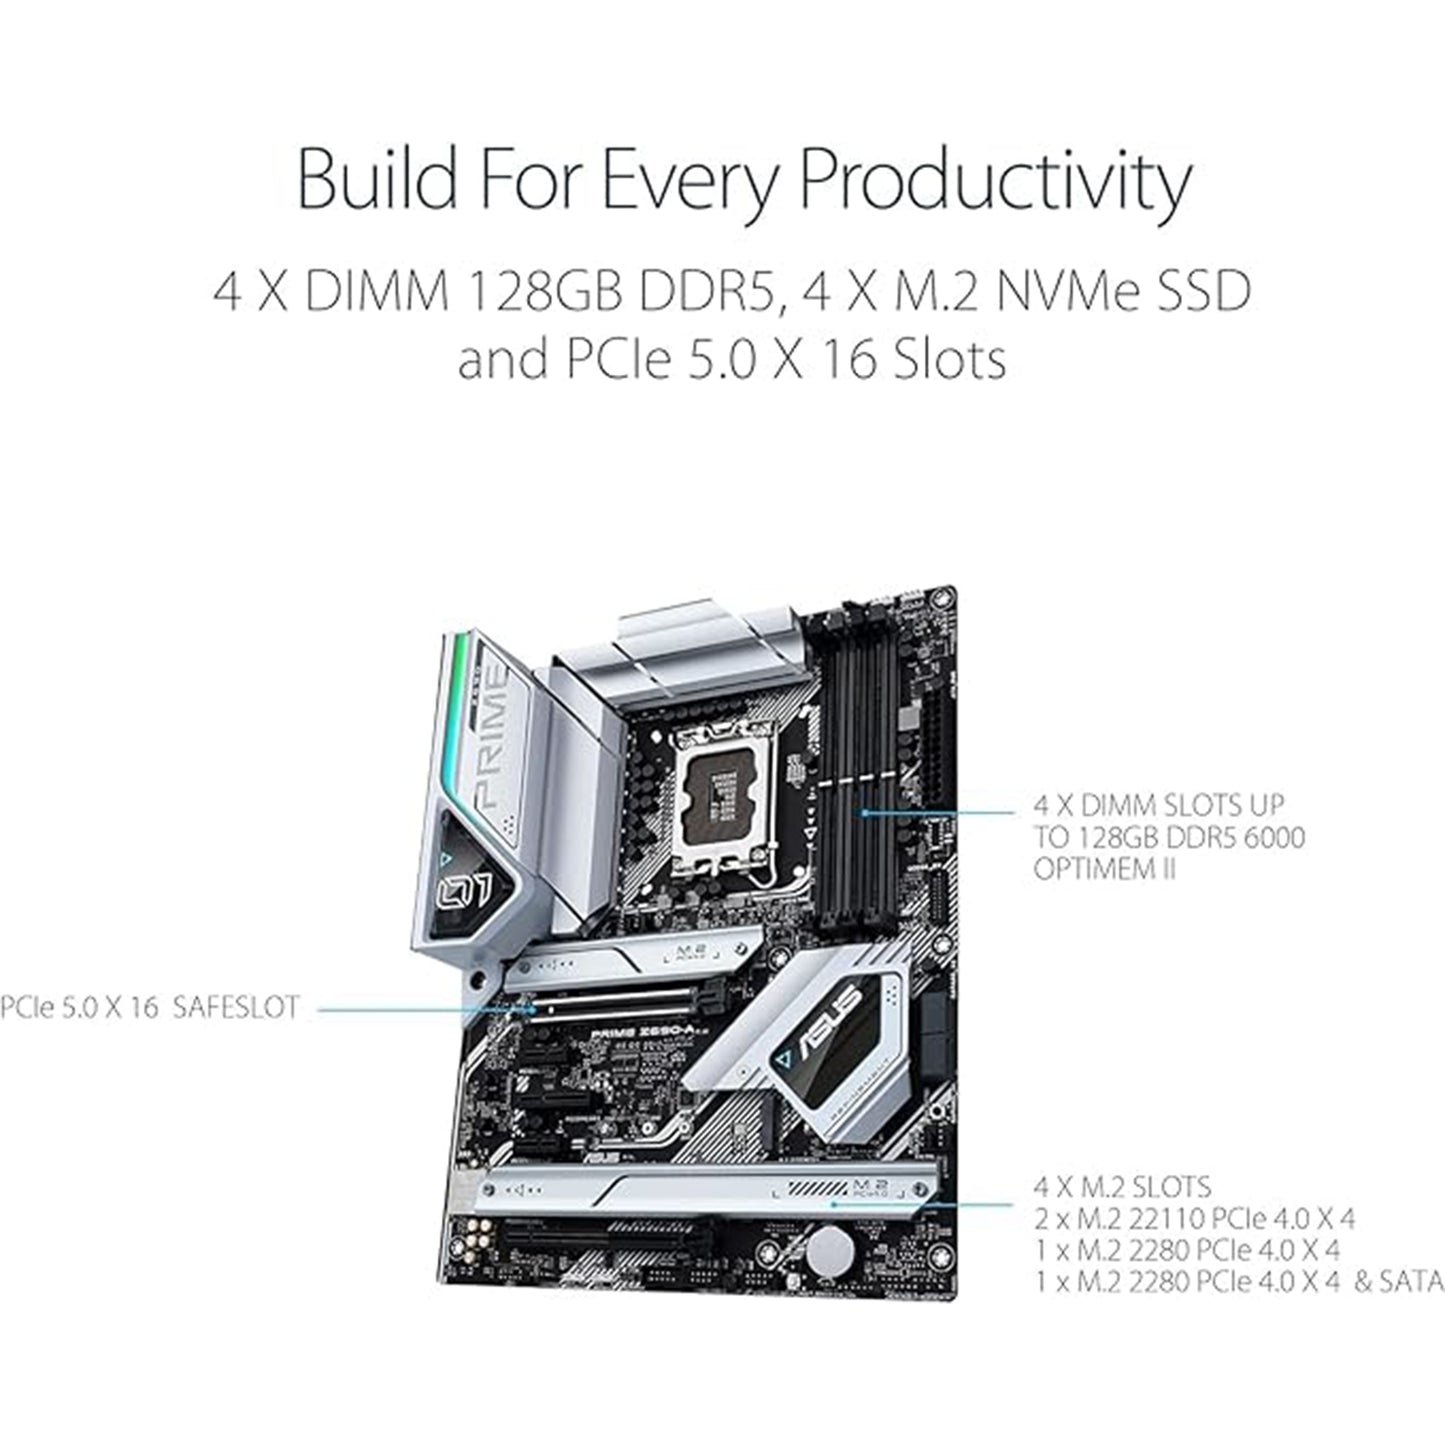 Micro Center Intel Core i9-12900K 16 Cores up to 5.2 GHz Unlocked Desktop Processor with Integrated Intel UHD Graphics 770 Bundle with ASUS Prime Z690-A DDR5 ATX Motherboard